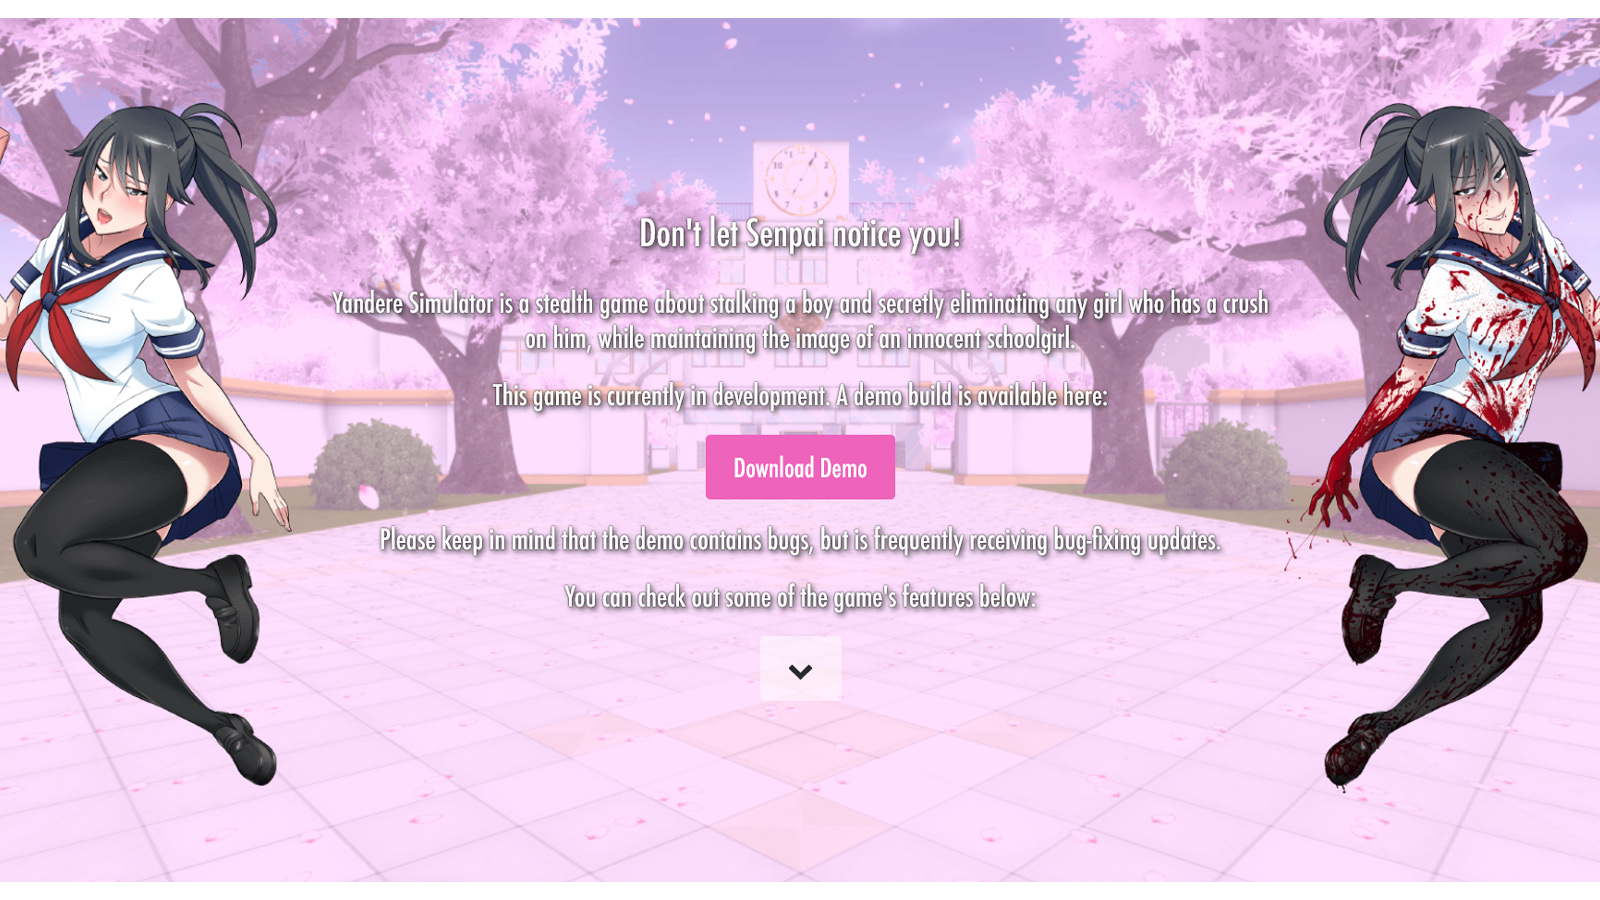 Find pricing, reviews and other details about Yandere Simulator